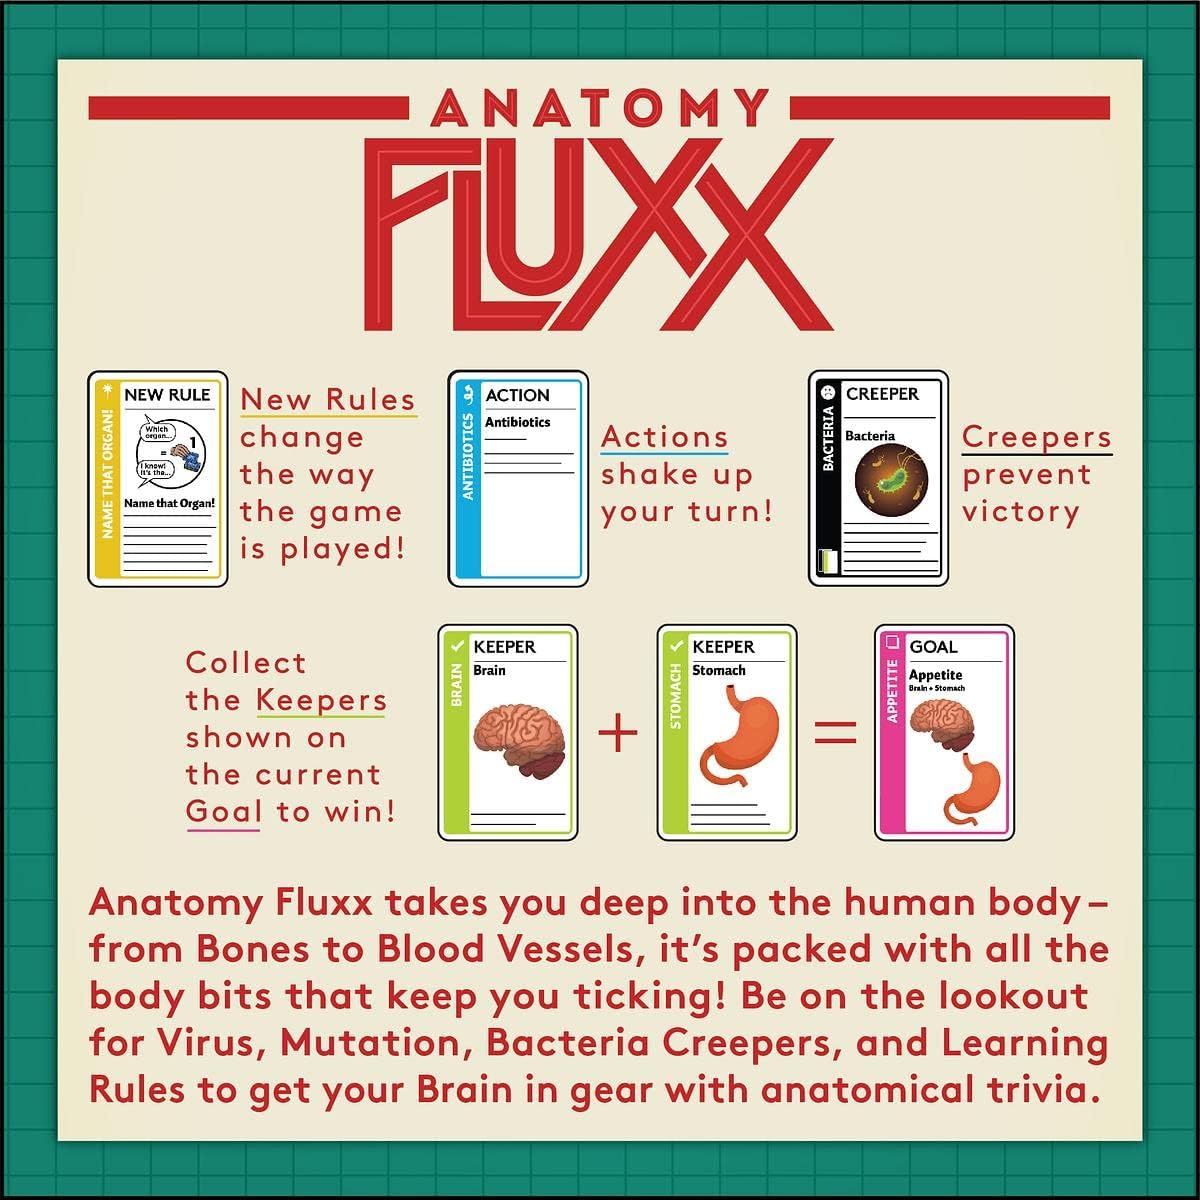 Looney Labs Anatomy Fluxx Card Game - Card Games for Kids and Adults Fun Games Board Games for Family Game Night Educational Games - 100 Playing Cards, 2-6 Player Games Ages 12 Years Old to Adult